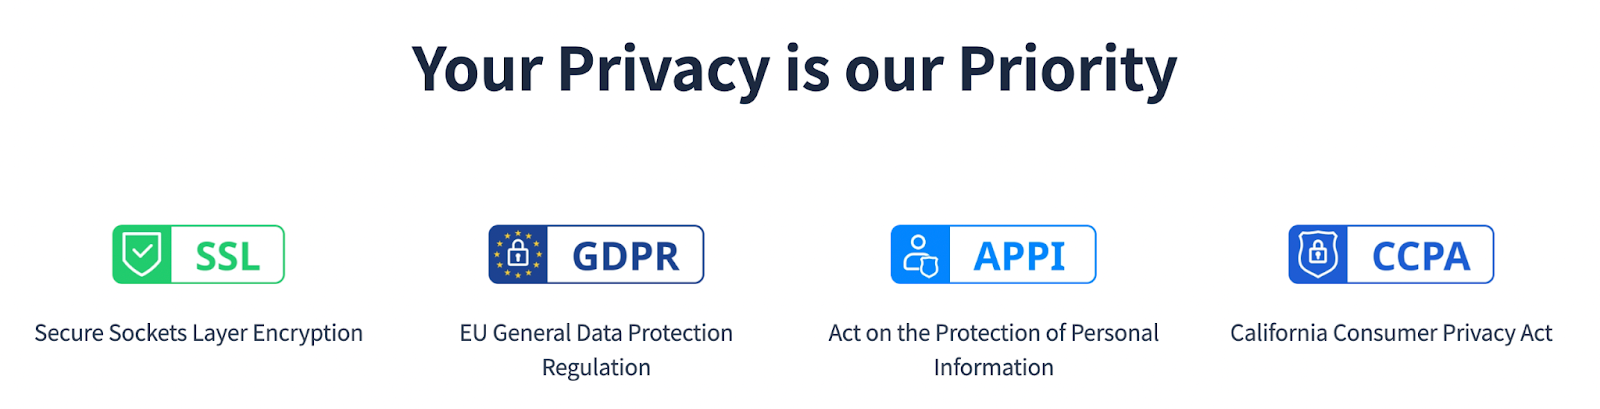 Notta security and privacy